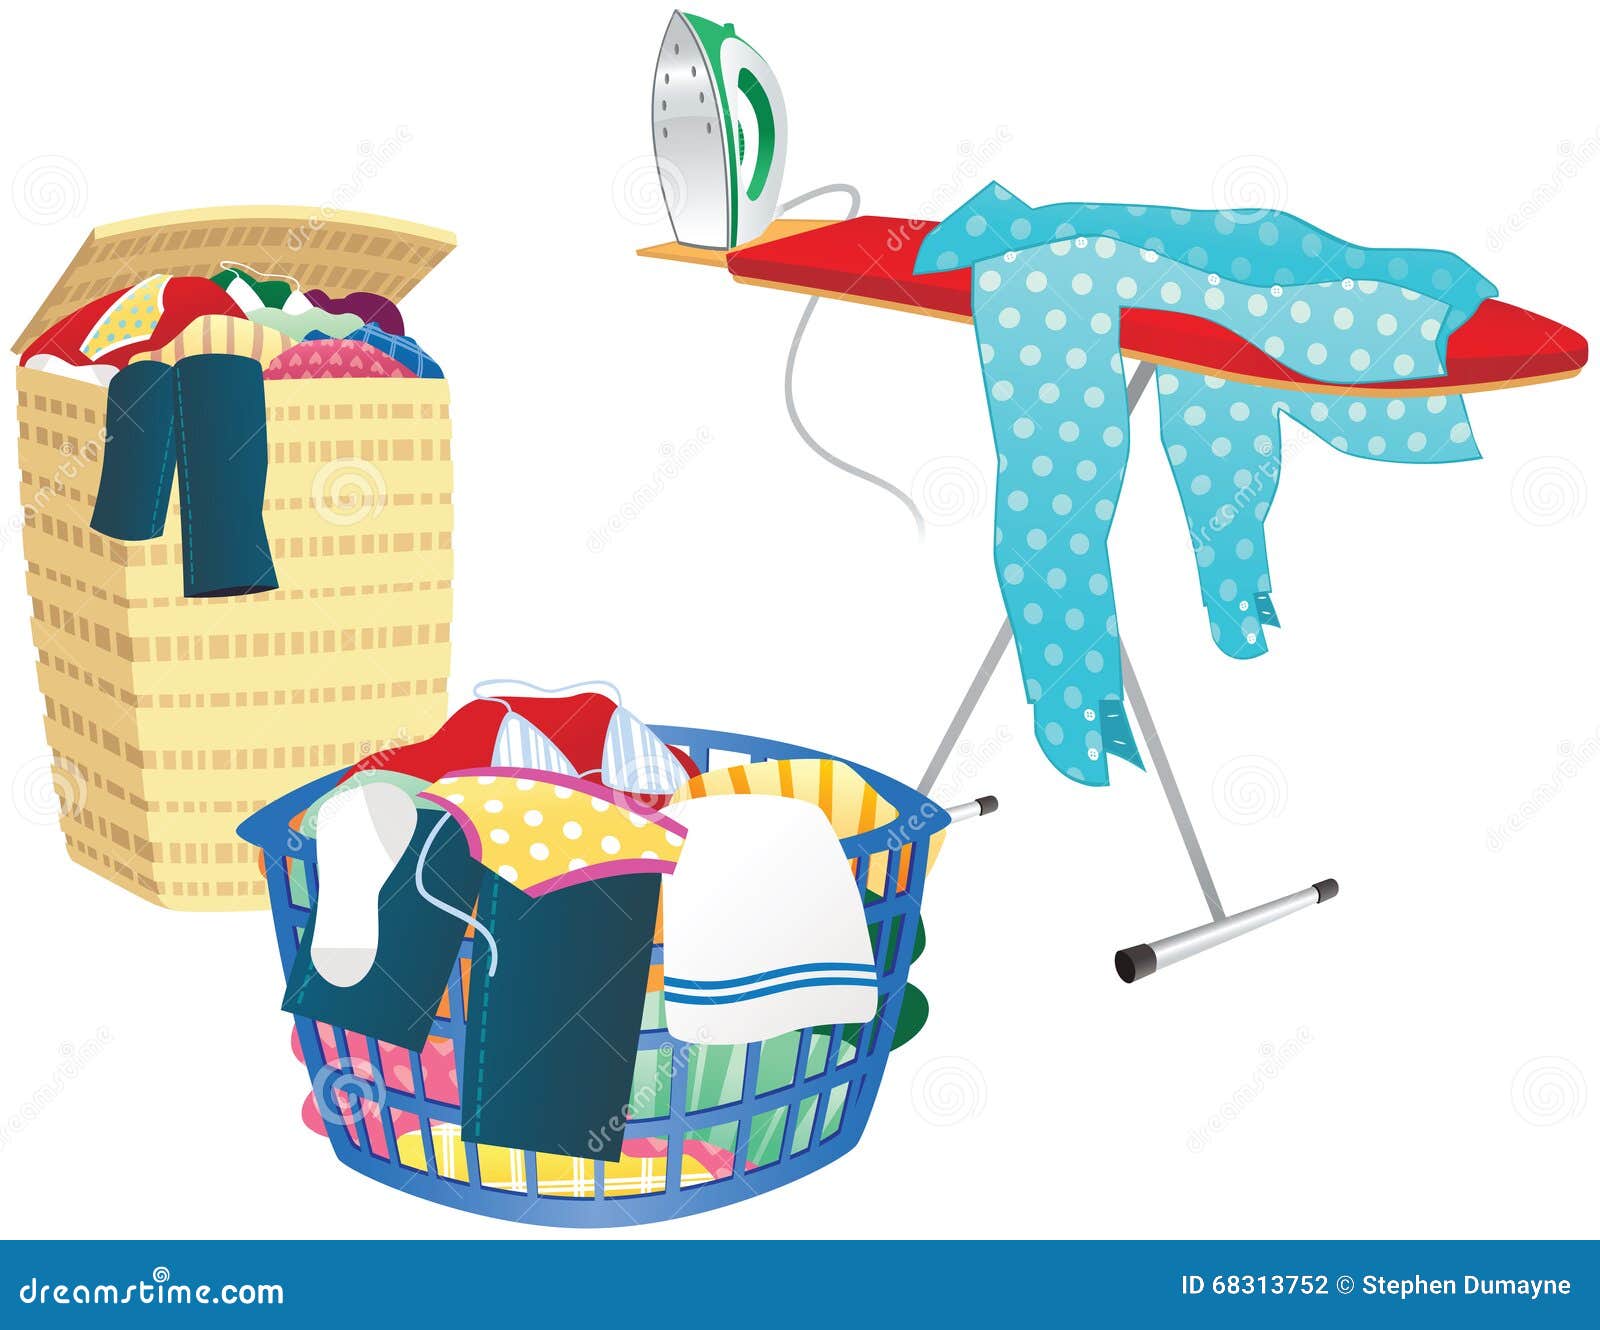 Laundry Basket Royalty Free Stock SVG Vector and Clip Art